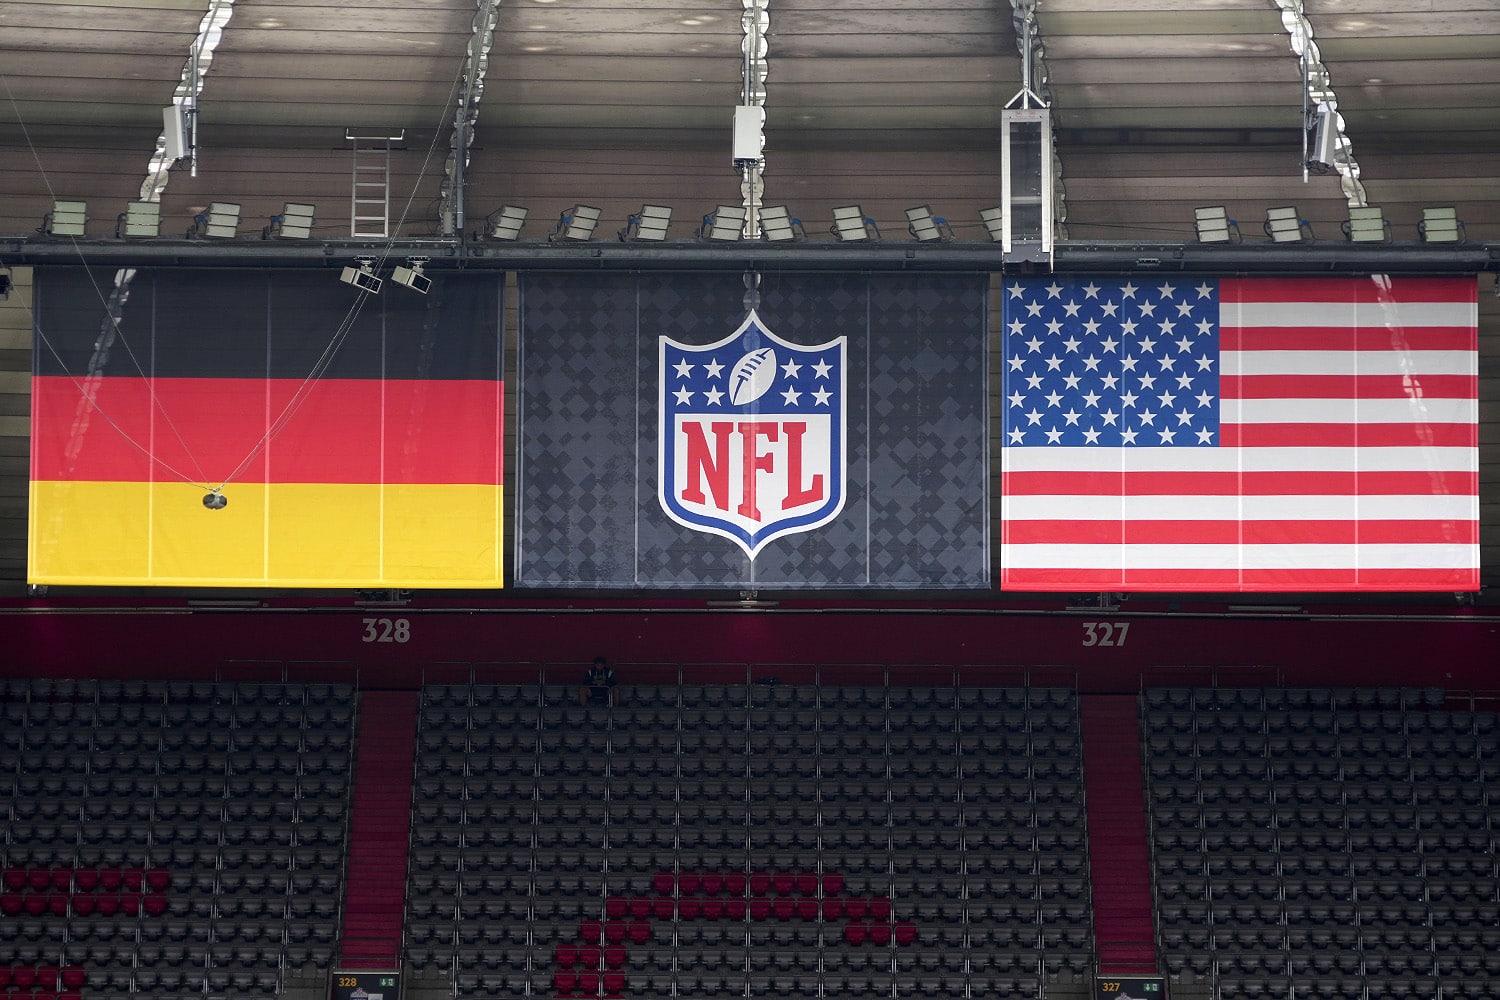 NFL logo in between German and American flags during the first NFL game in Germany